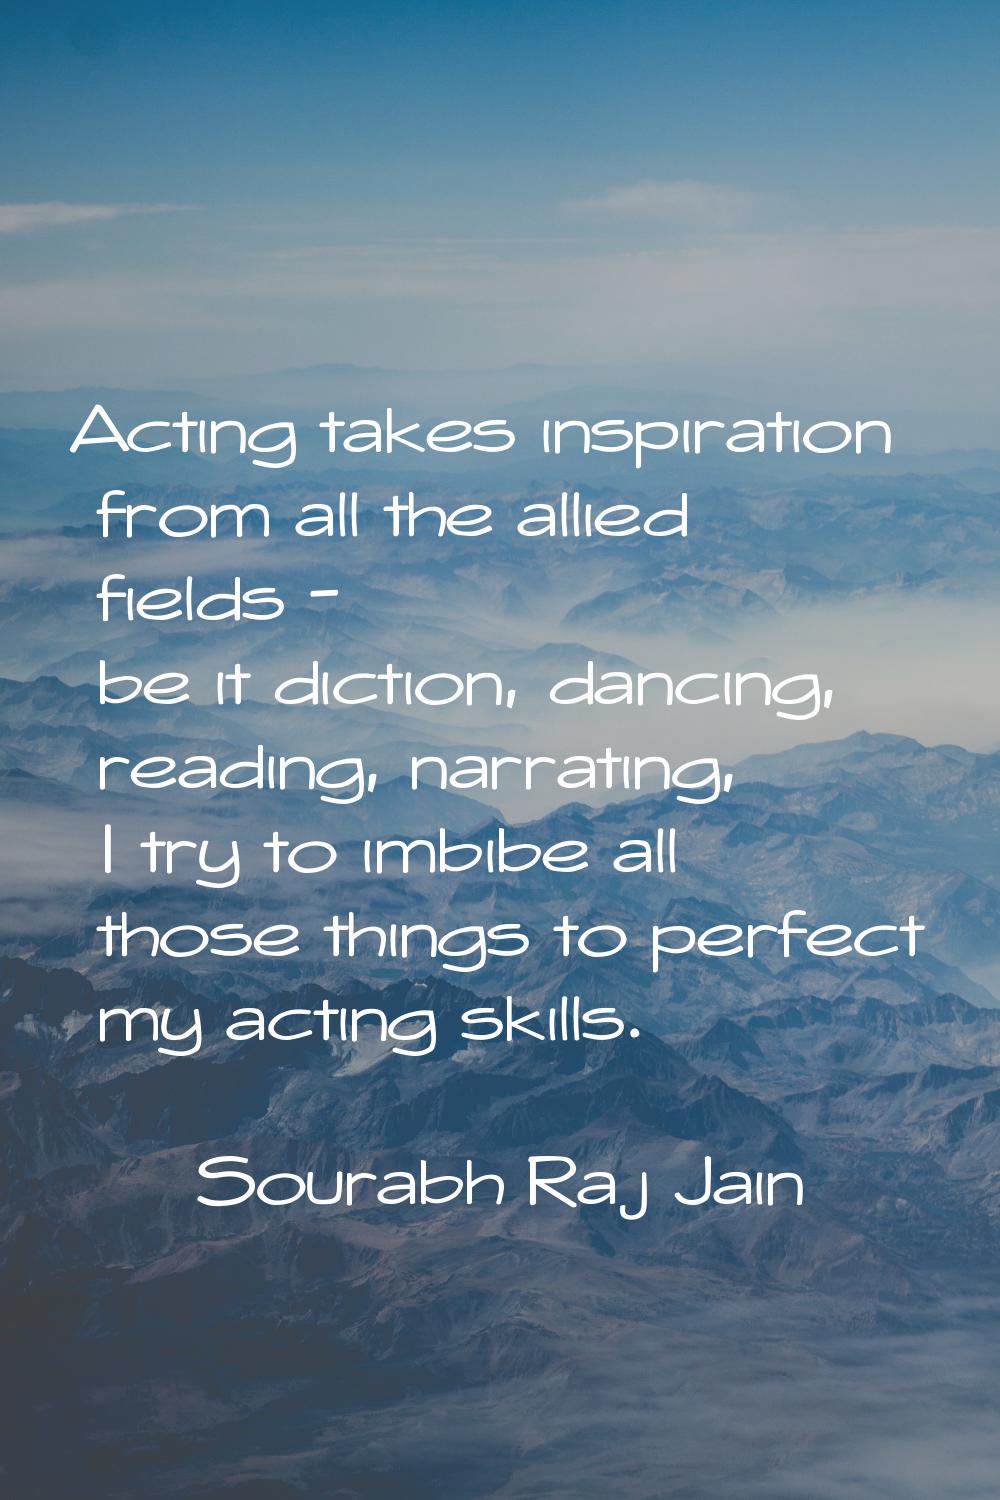 Acting takes inspiration from all the allied fields - be it diction, dancing, reading, narrating, I